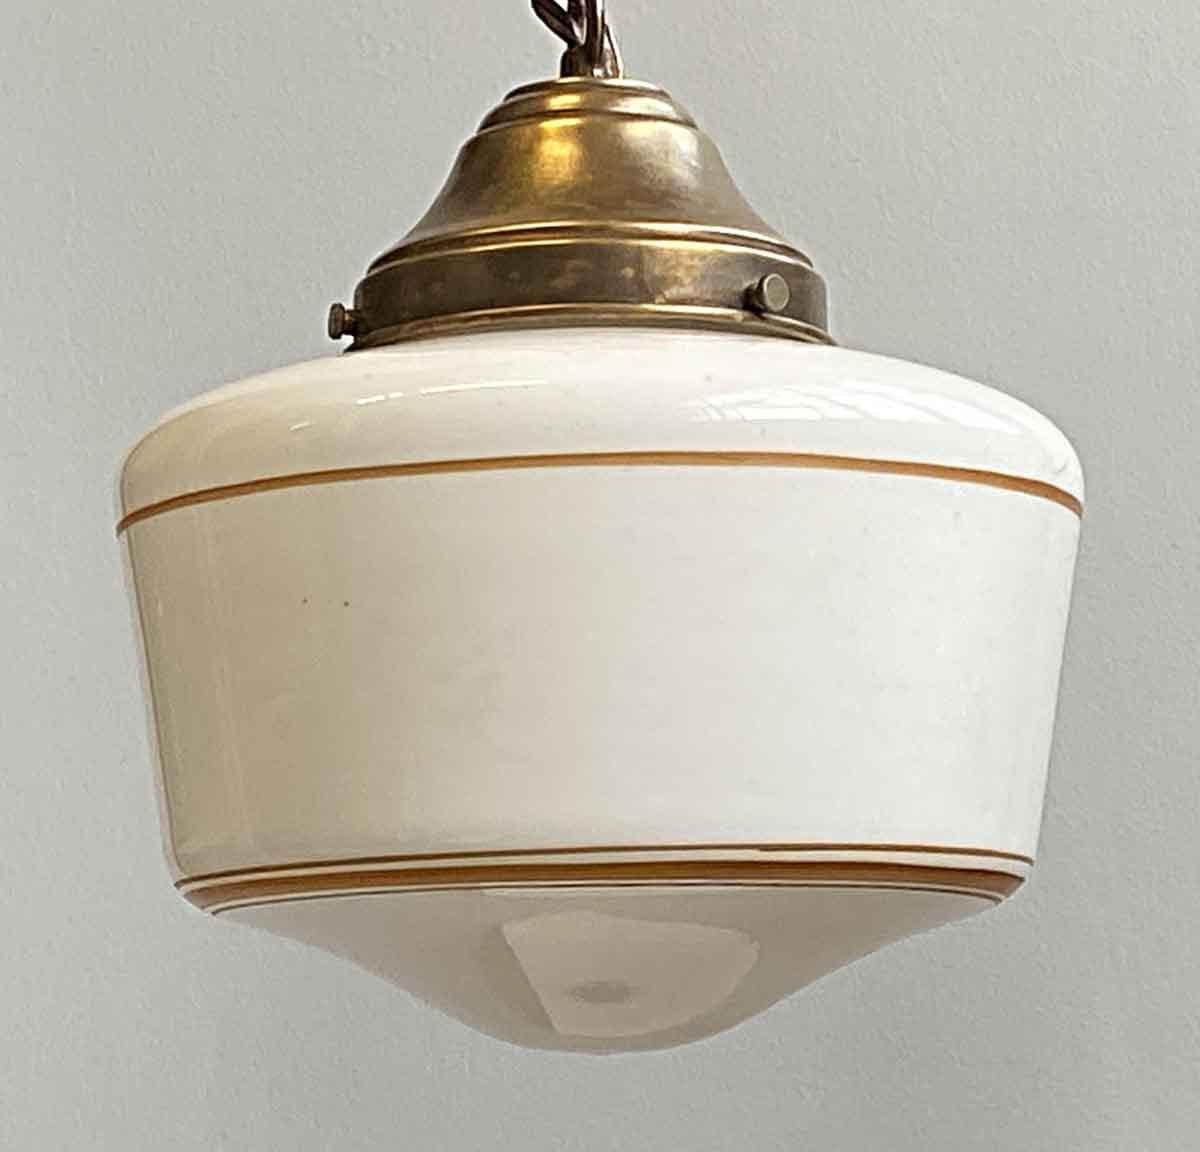 Industrial 1930s Original Schoolhouse Globe Pendant Light with Brass Colored Pin Stripes